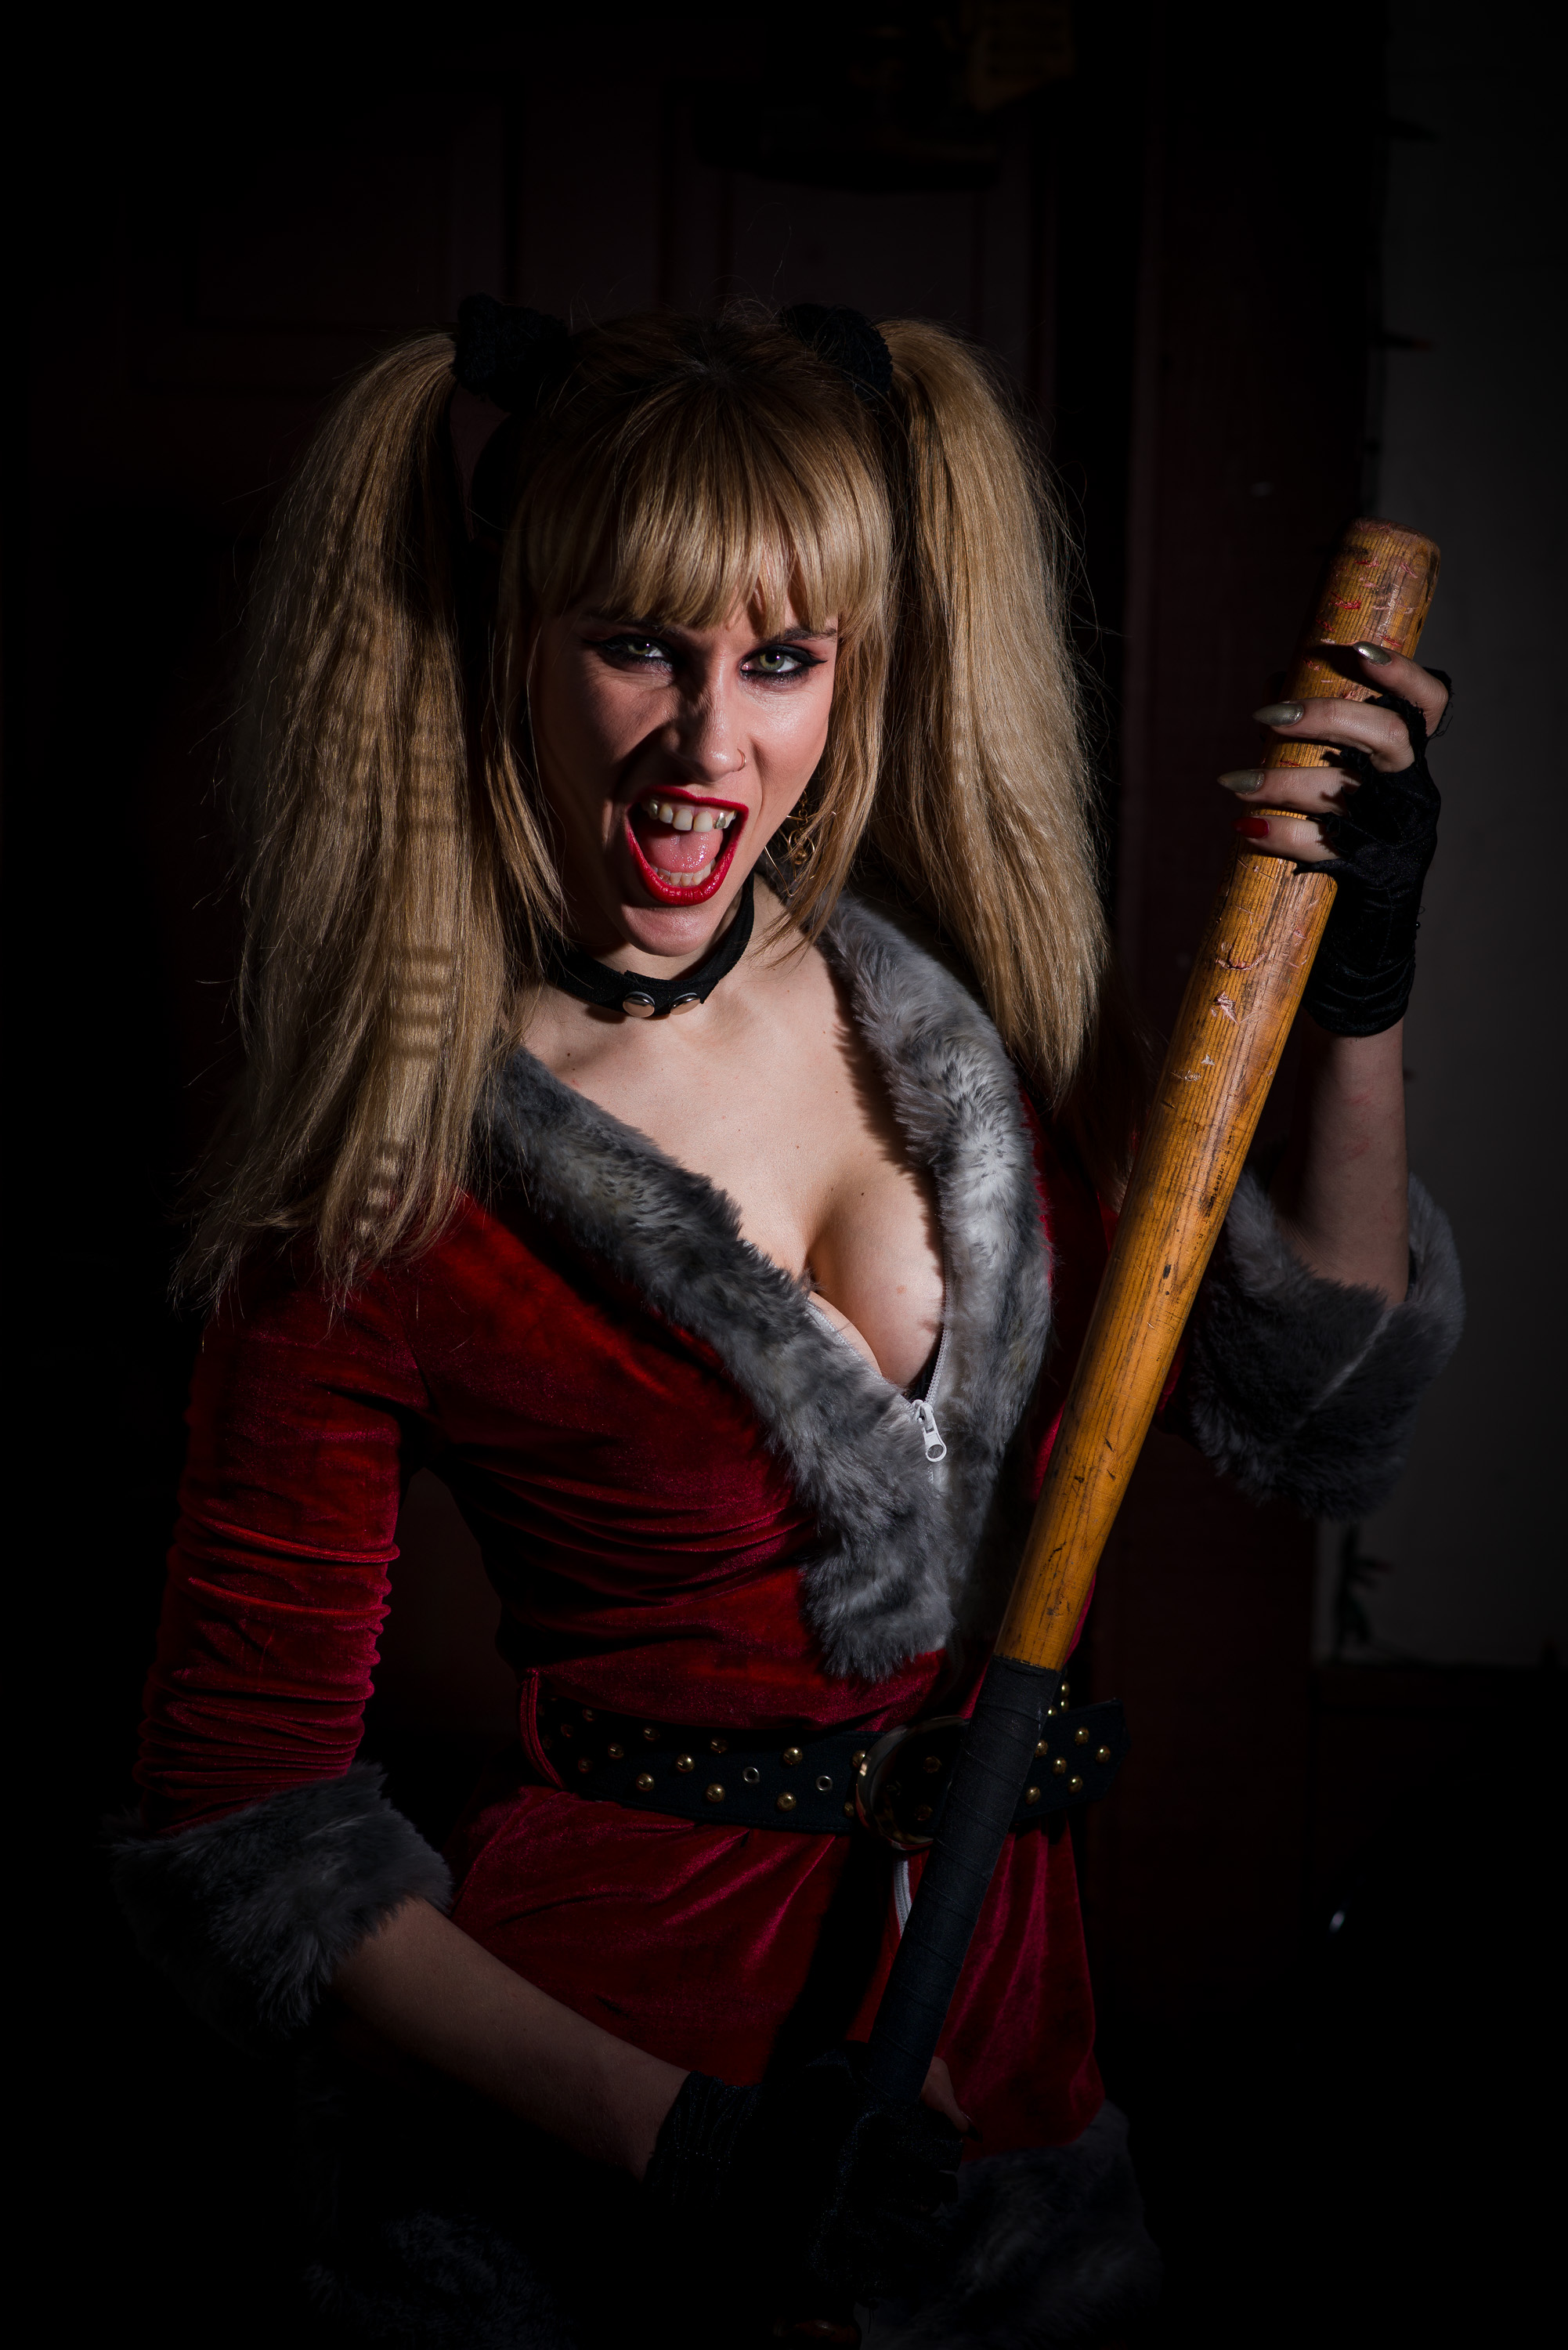 here's another of the horror movie shoot I recently did. Mrs. Cl